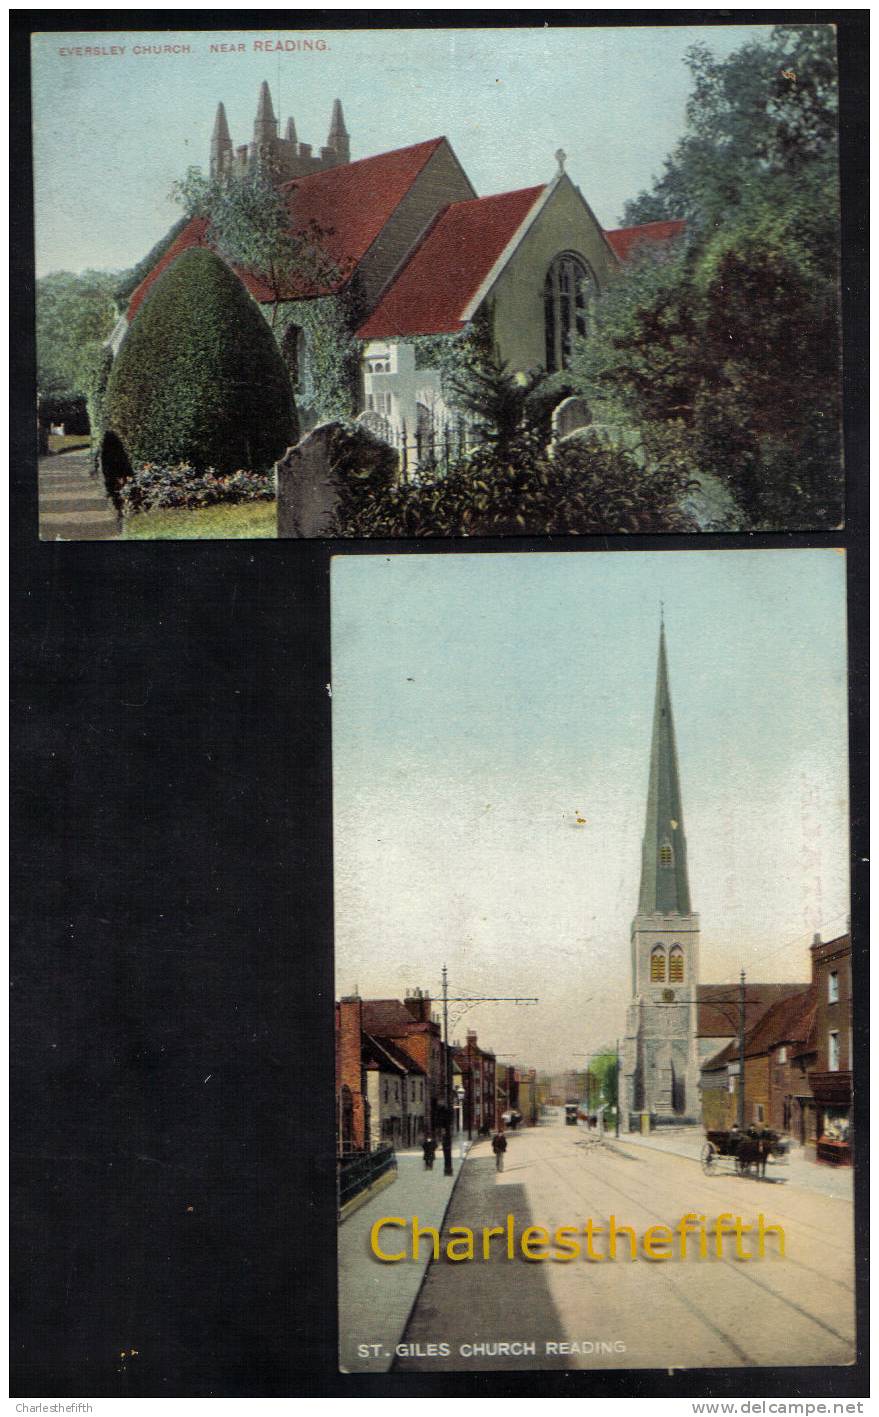 2 SUPERB VINTAGE CARDS ** READING ( Eversley Church And St Gilles Churc Reading ) ** - Reading